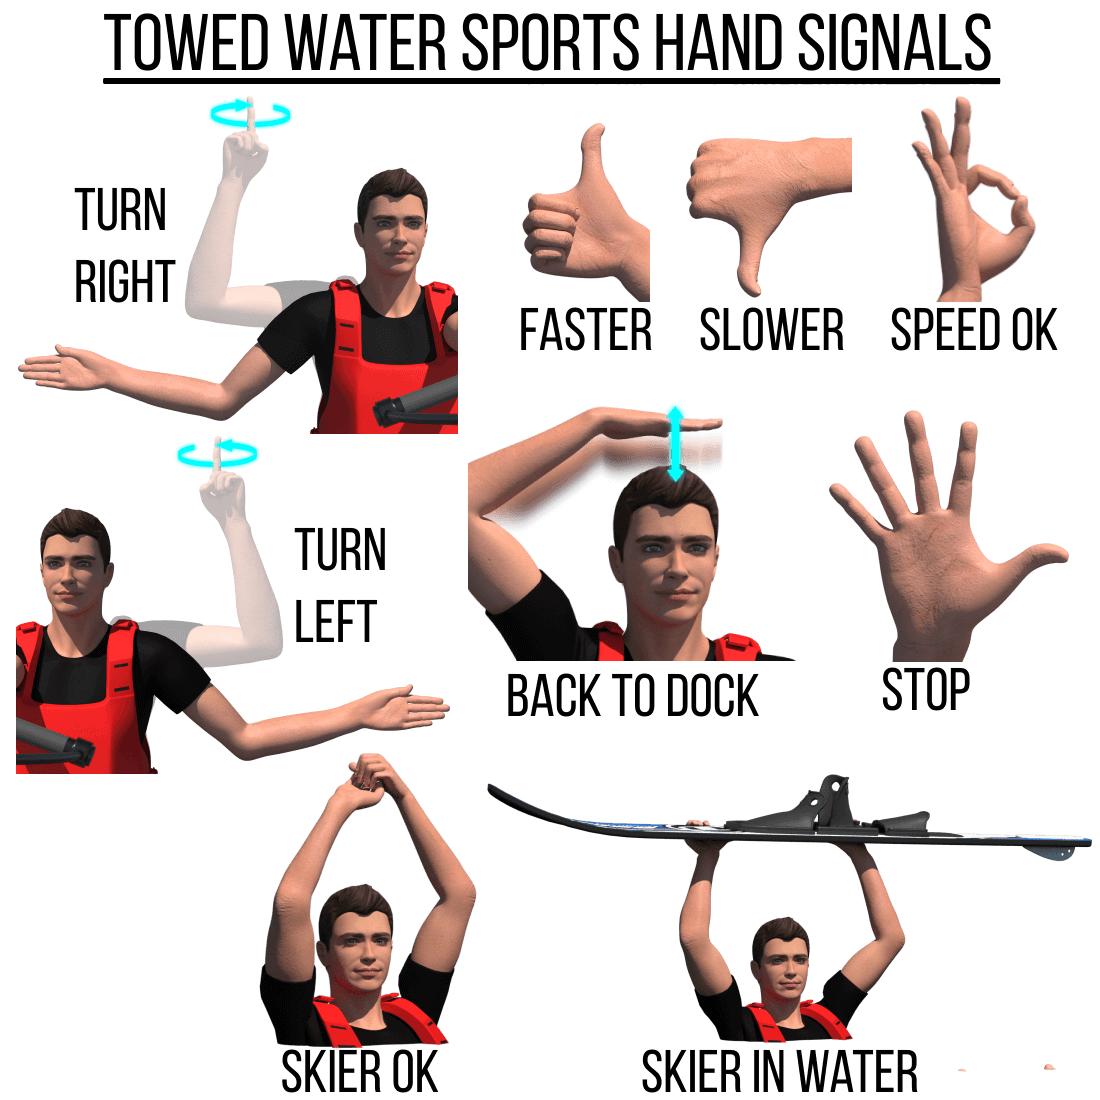 Towed water sports hand signals